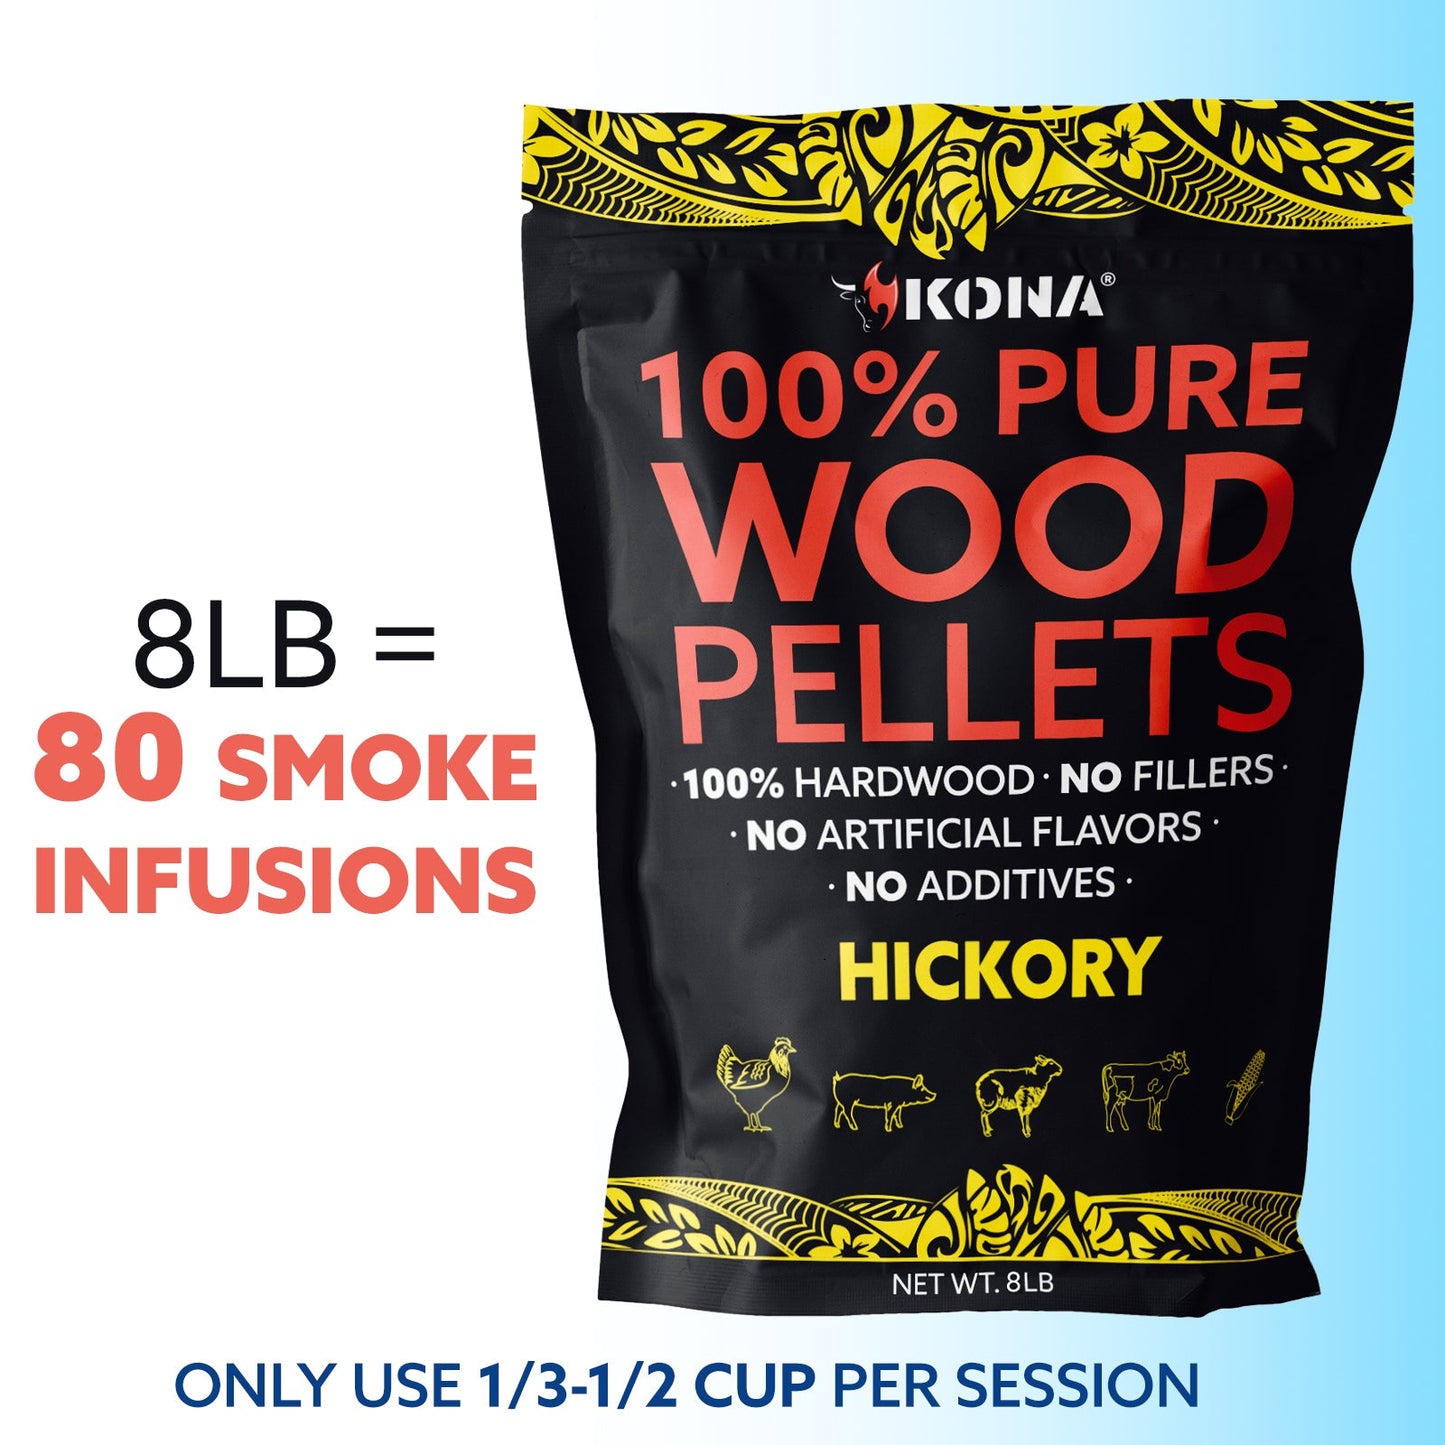 Kona 100% Hickory Wood Pellets - Grilling, BBQ & Smoking - Concentrated Pure Hardwood - Bold Smoke - The Tool Store